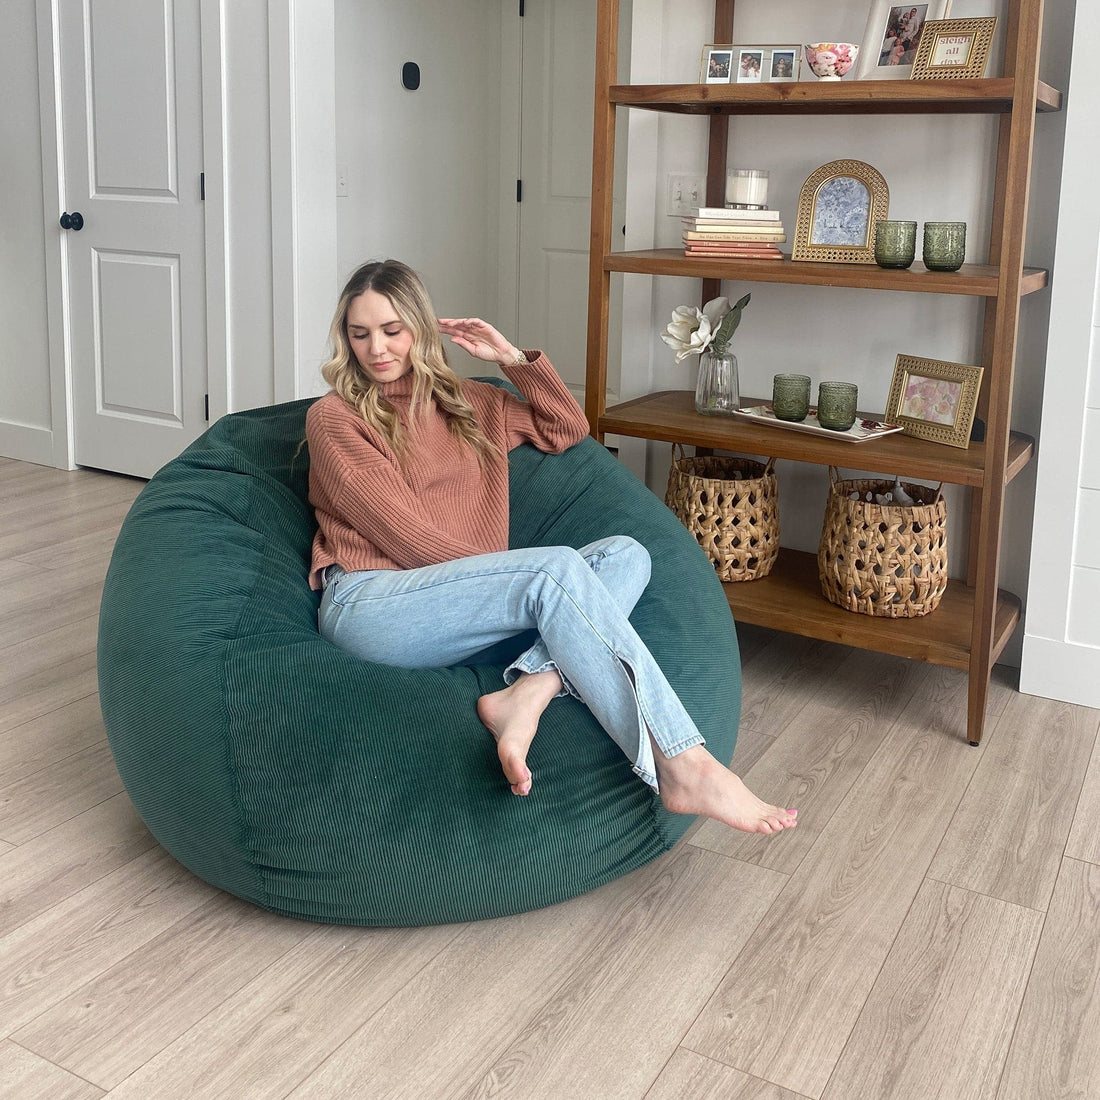 10 of the Best Modern Bean Bag Chairs: Add Playful Style to Your Home